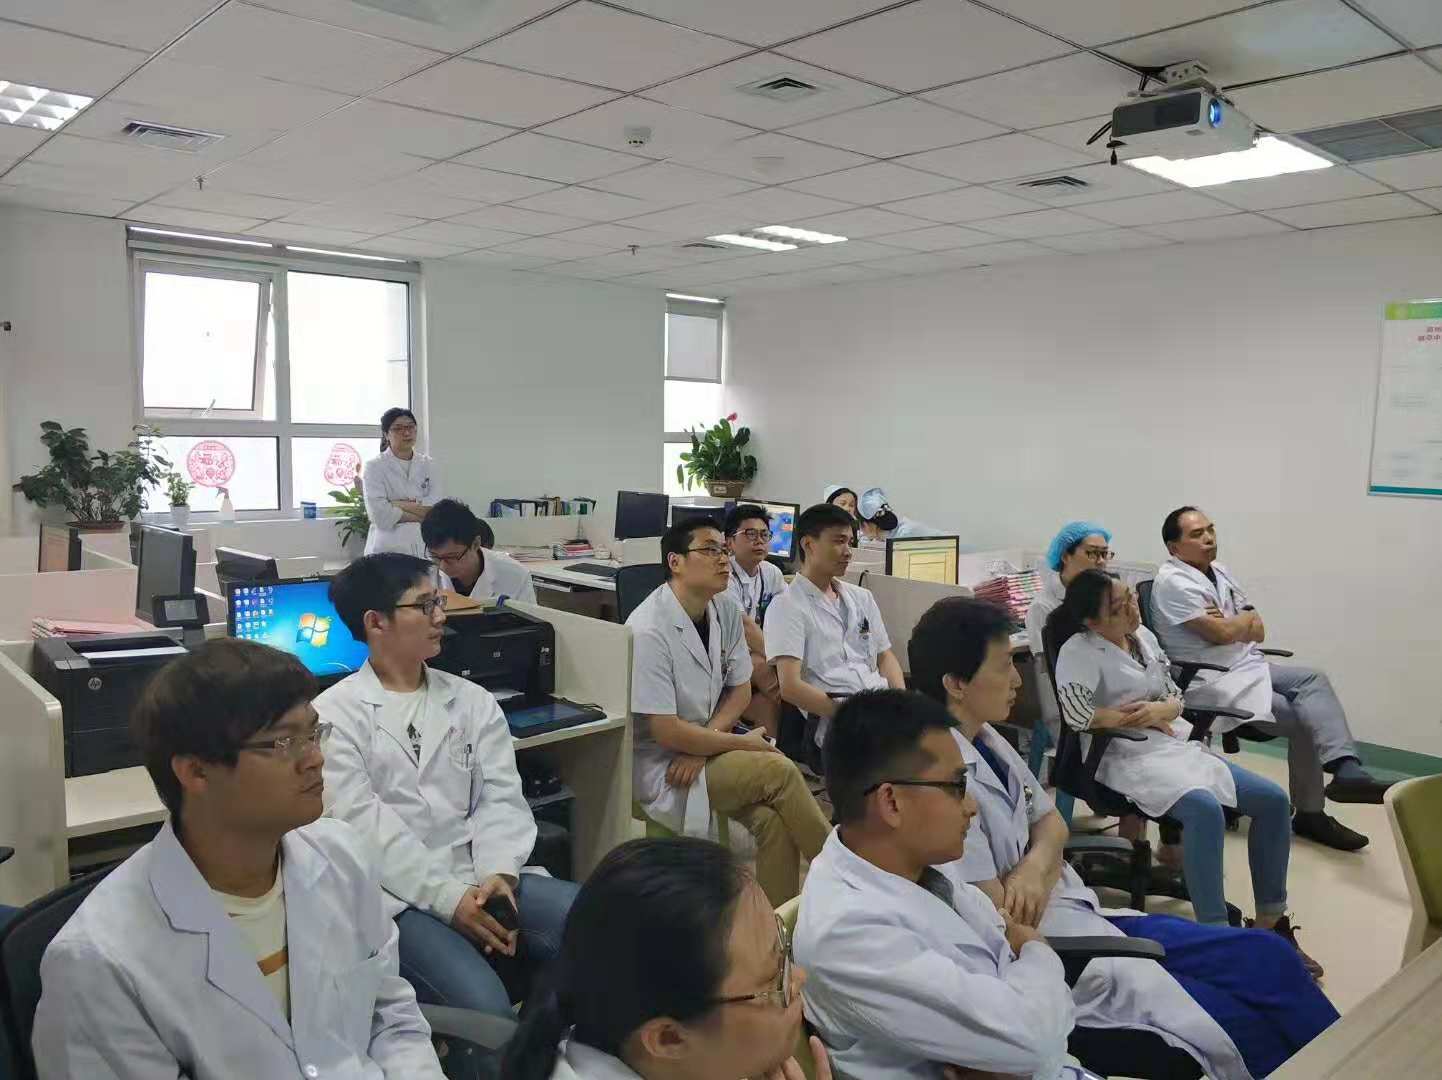 On the morning of June 13th, henan orthopedics hospital successfully held Dr